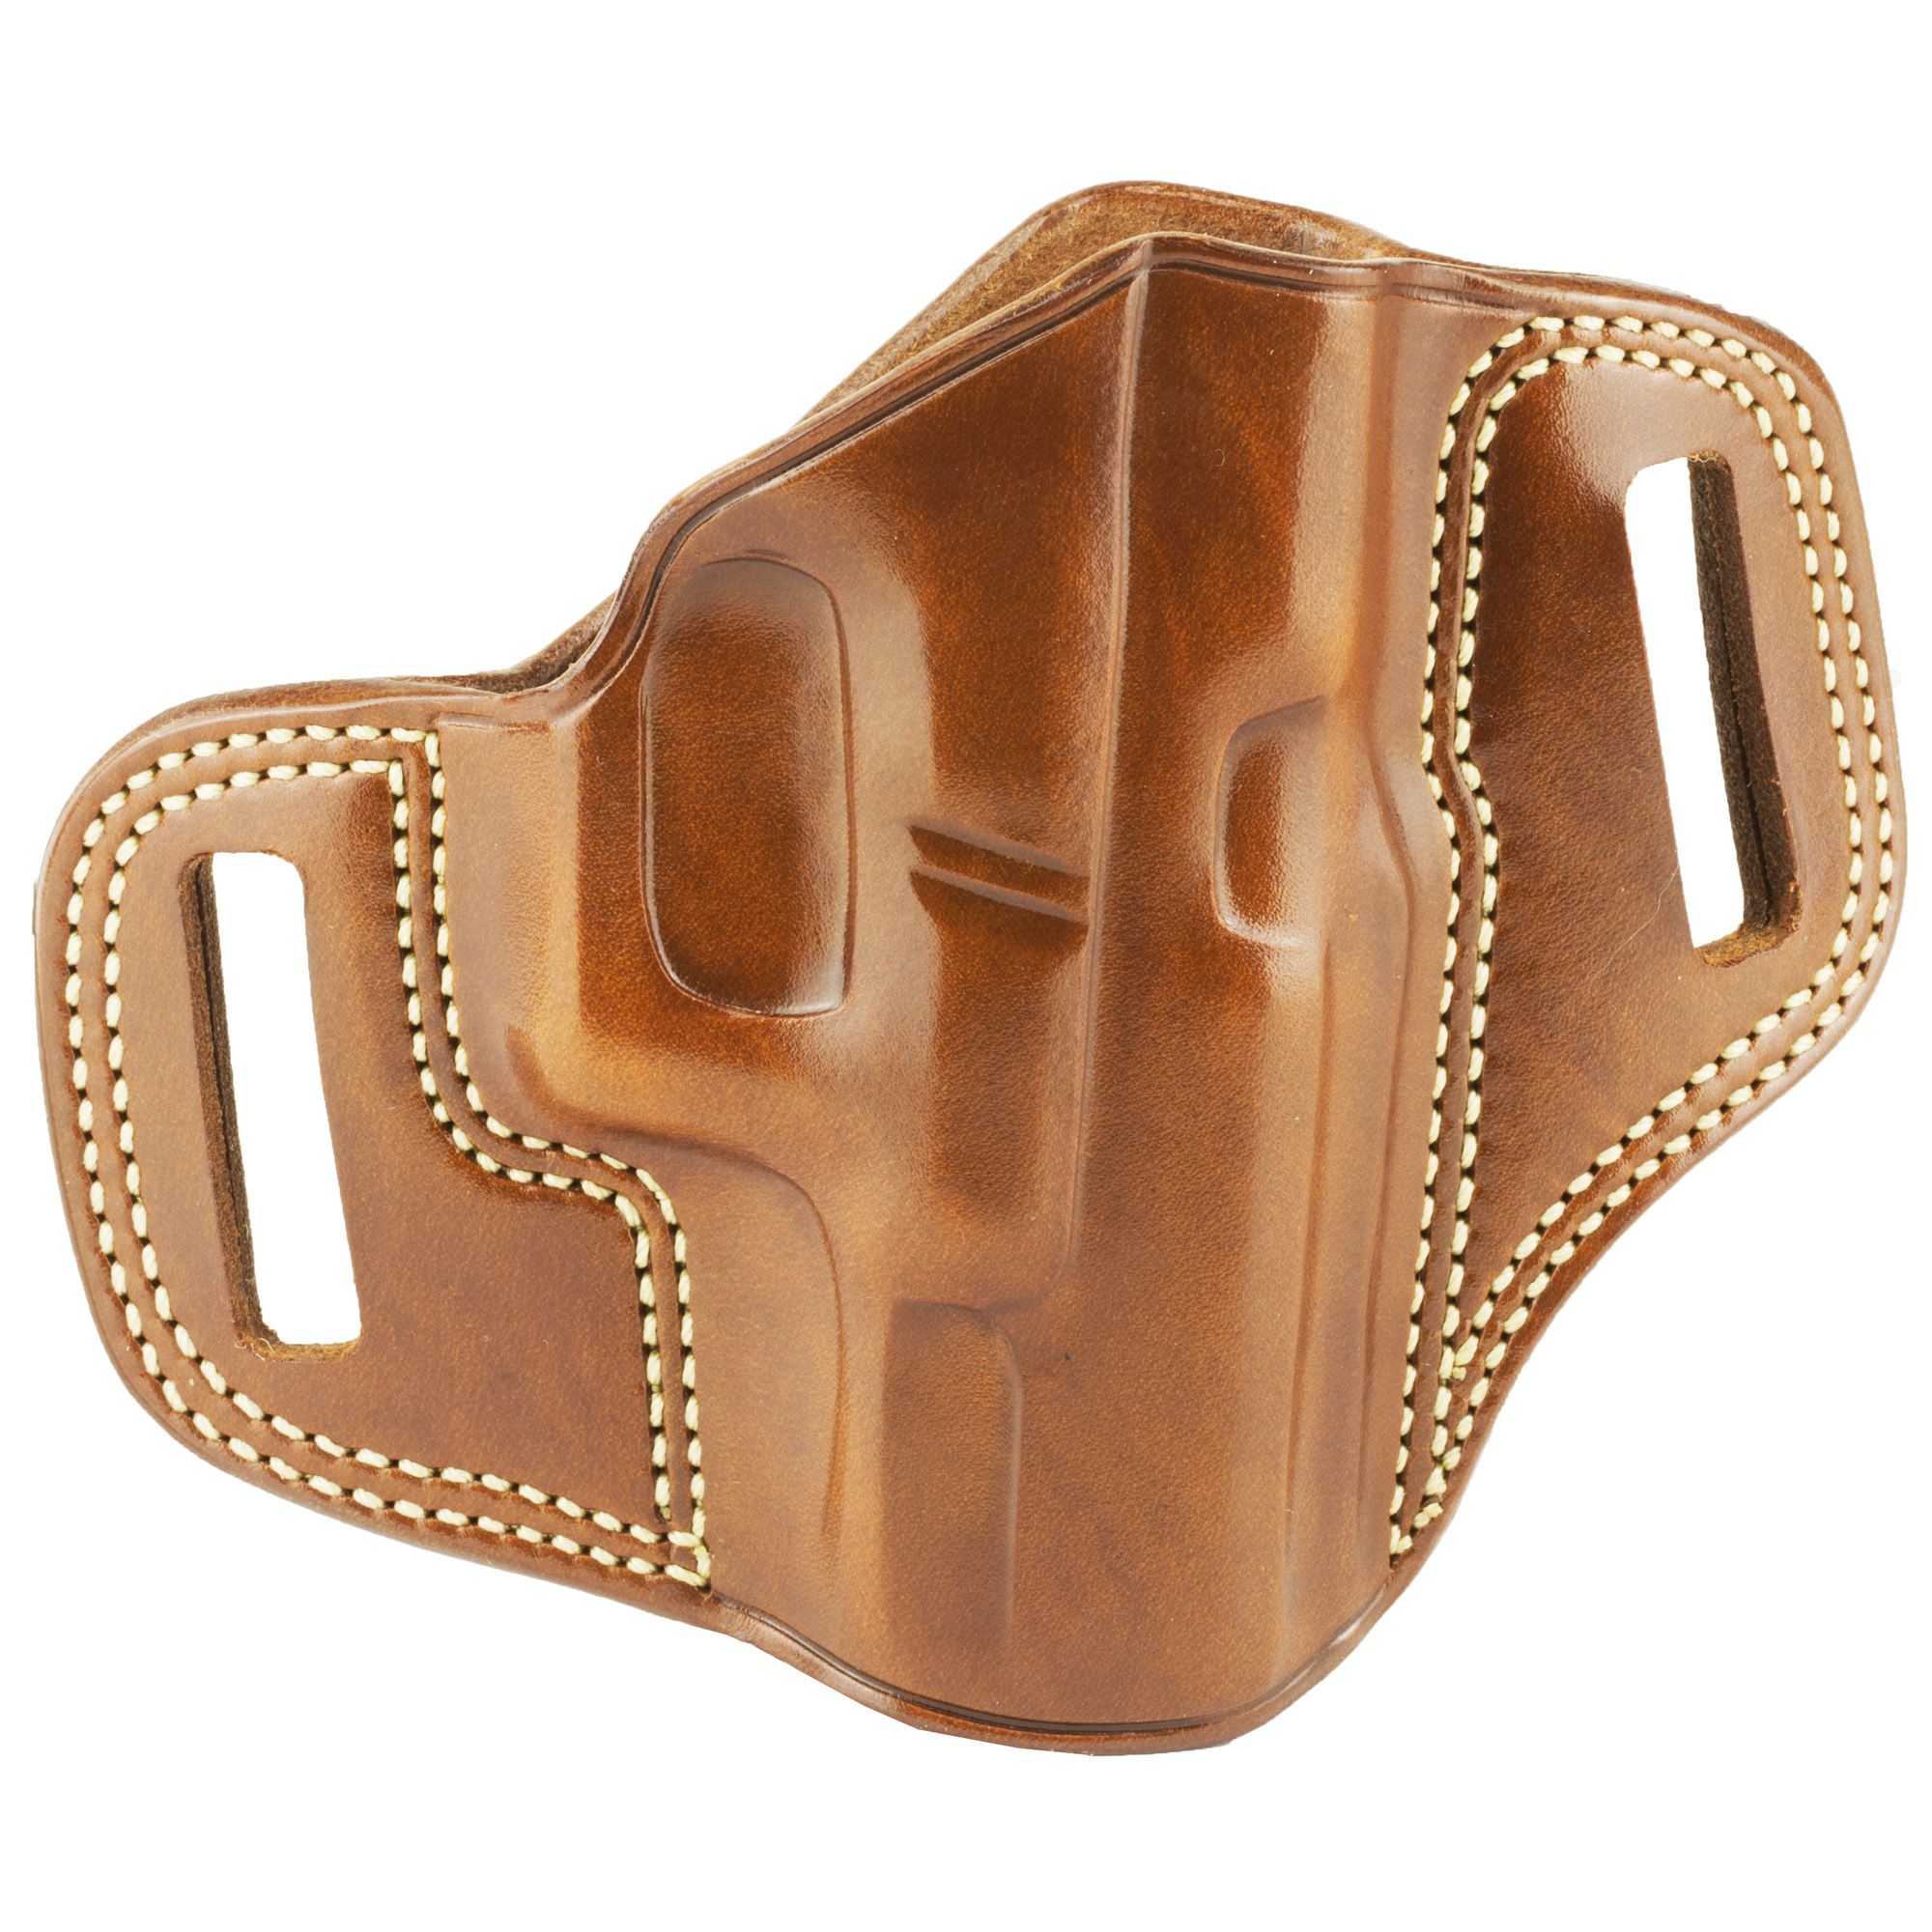 Galco Combat Master Concealment Holster - Right Hand Tan Glock 19/23/32: CM226